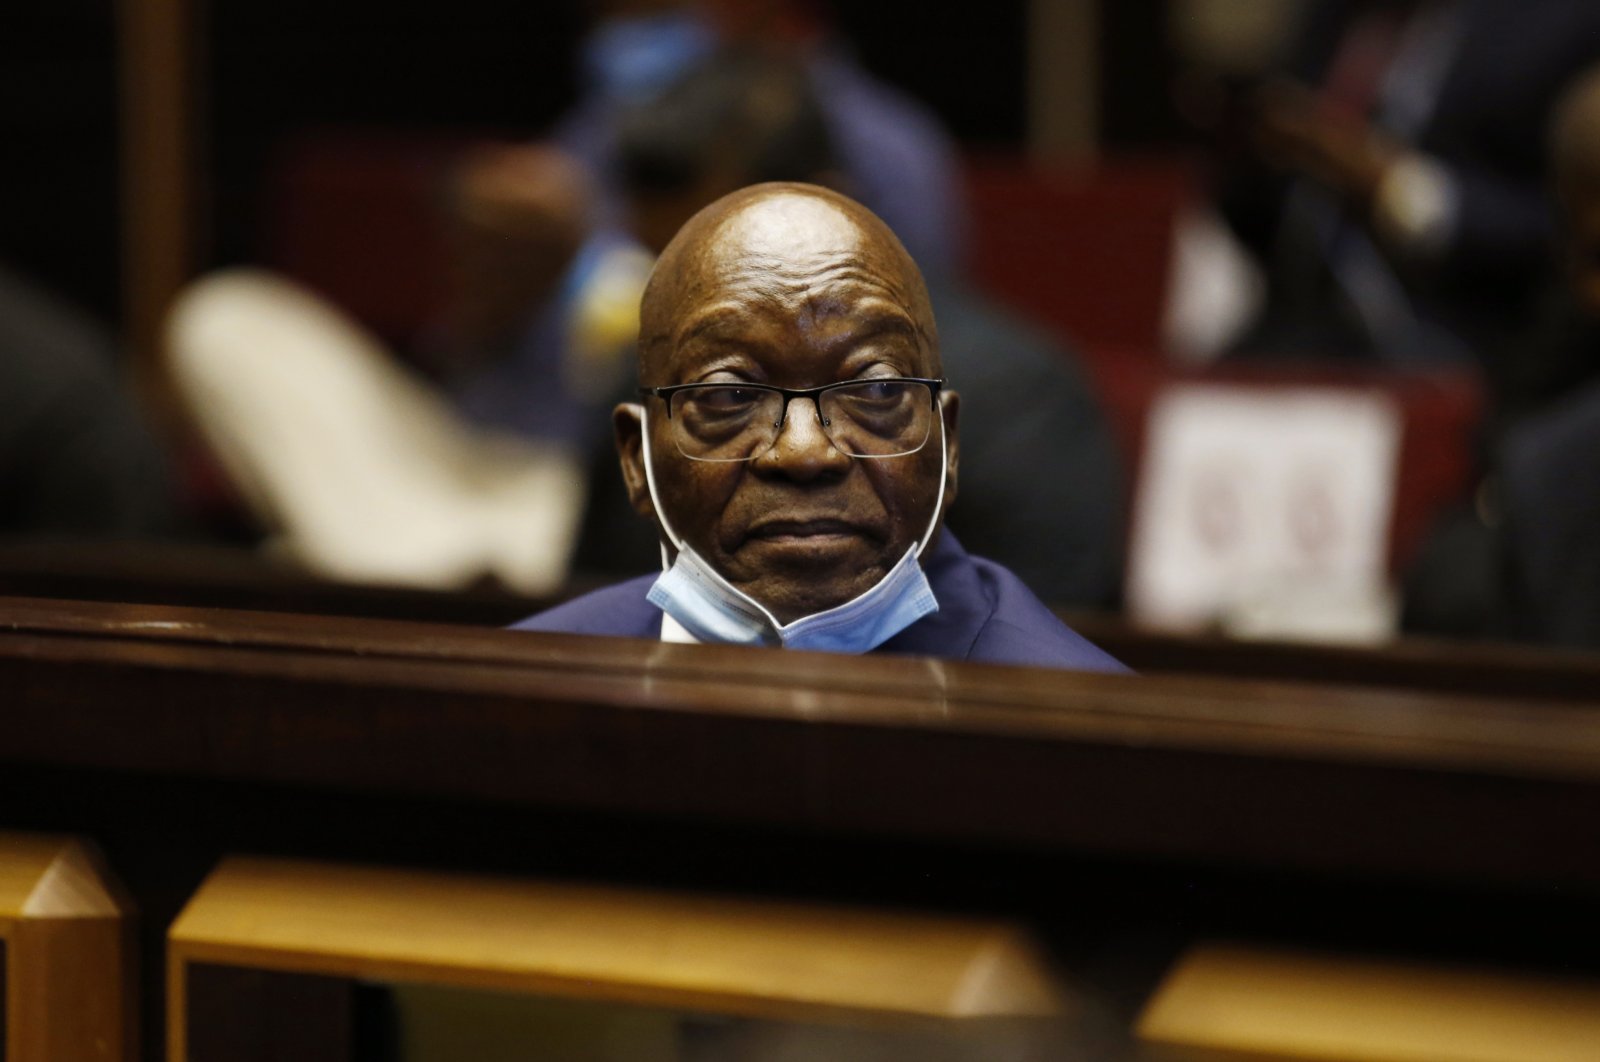 Former South African President Jacob Zuma, sits in the High Court at the start of his corruption trial, Pietermaritzburg, South Africa, May 26, 2021. (AP Photo)